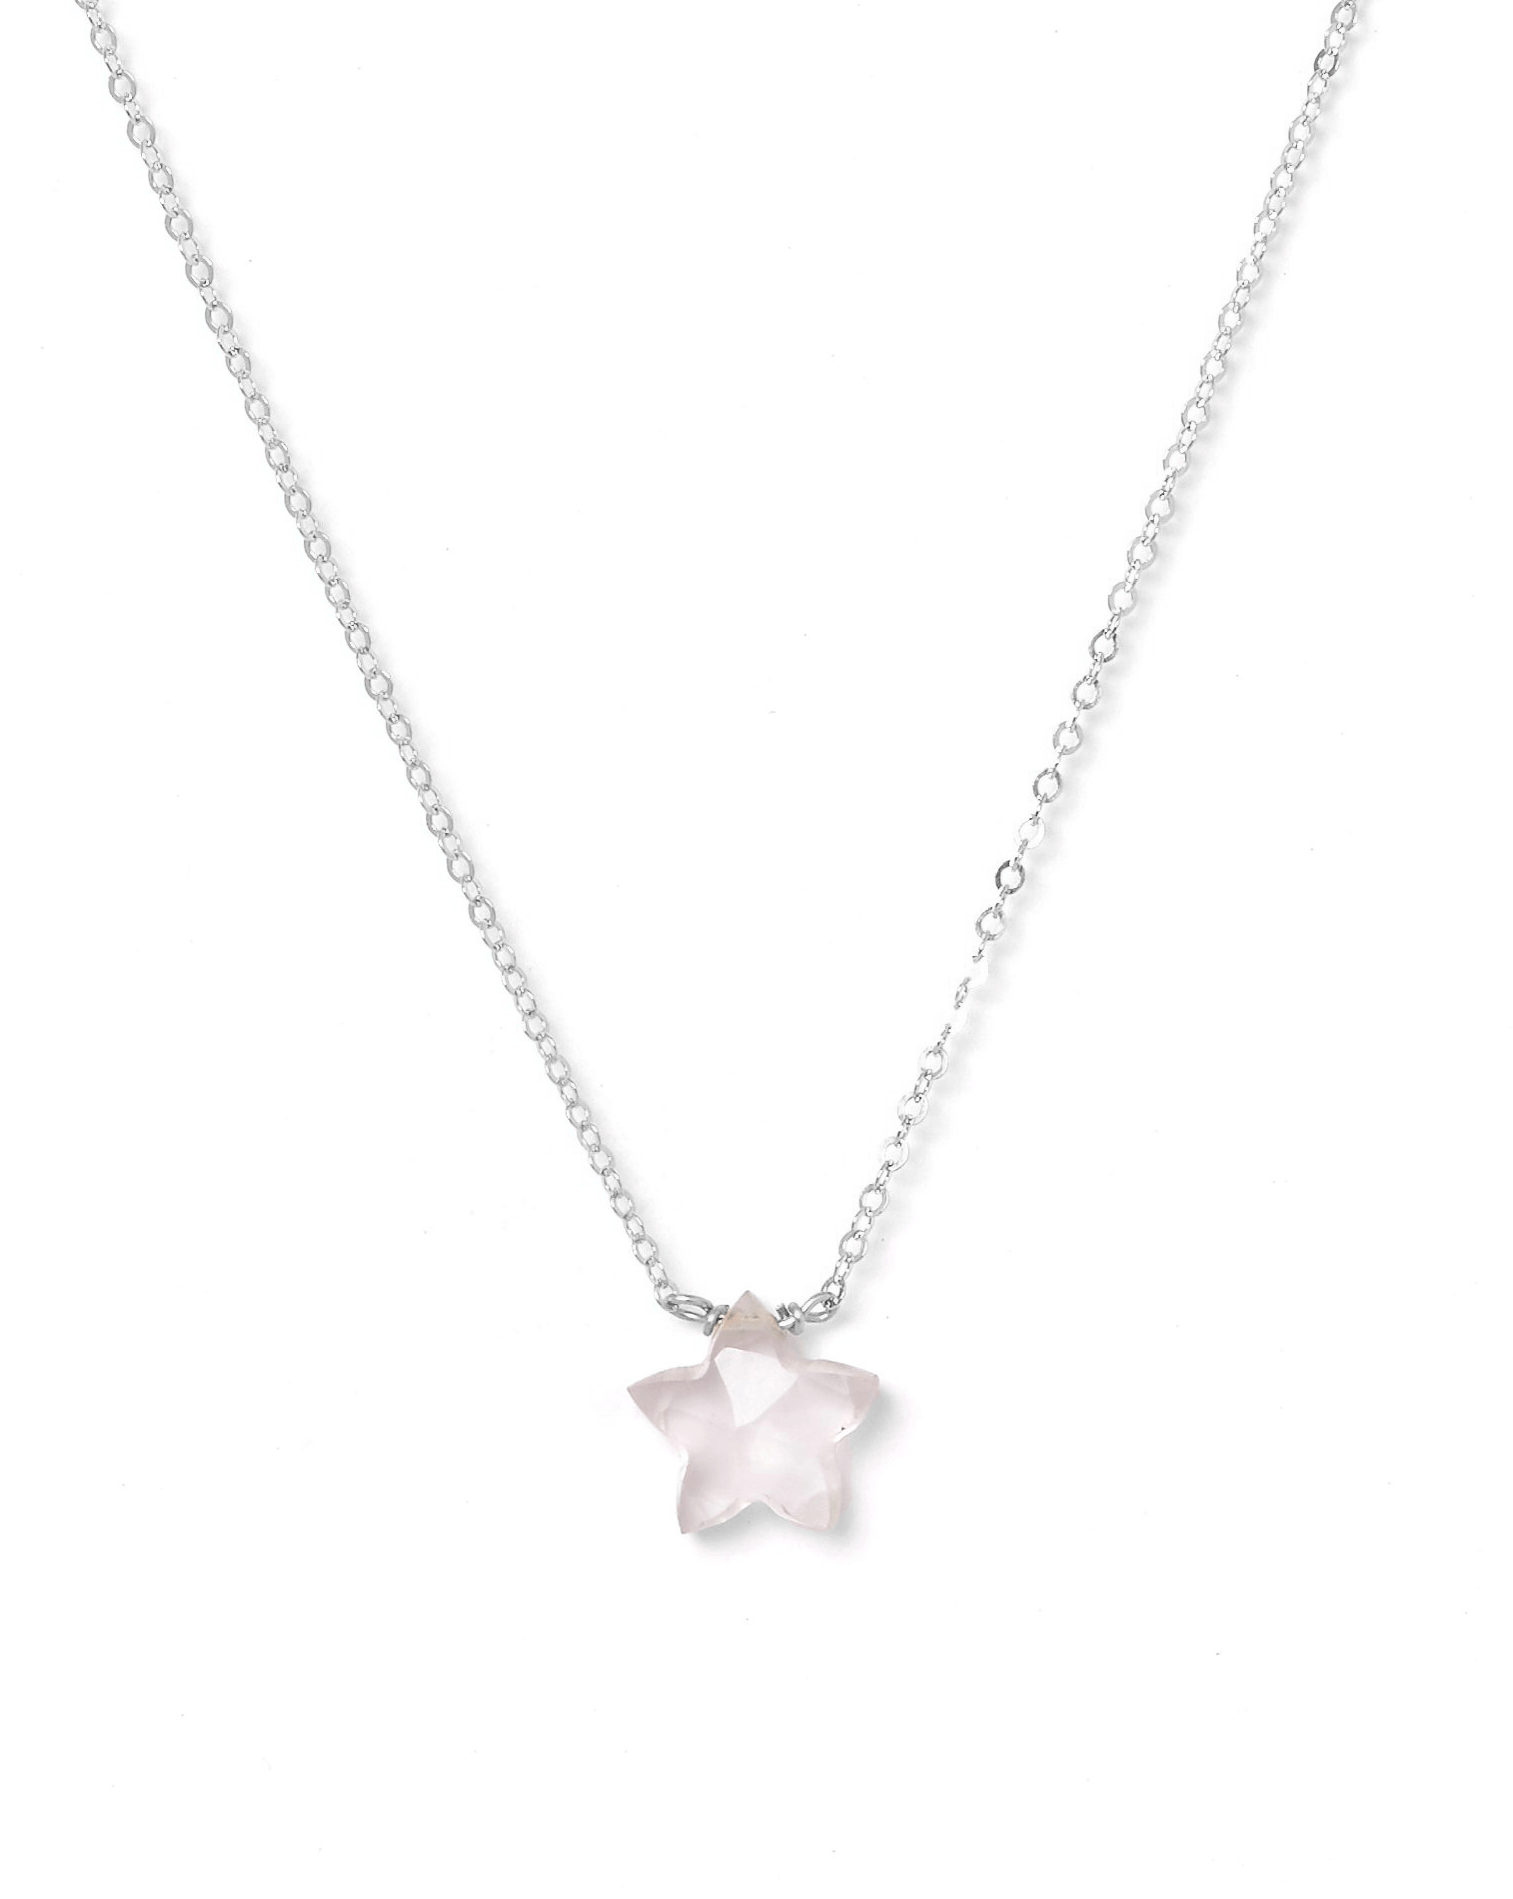 Star Necklace by KOZAKH. A 16 to 18 inch adjustable length necklace, crafted in Sterling Silver, featuring a Rose Quartz star charm.